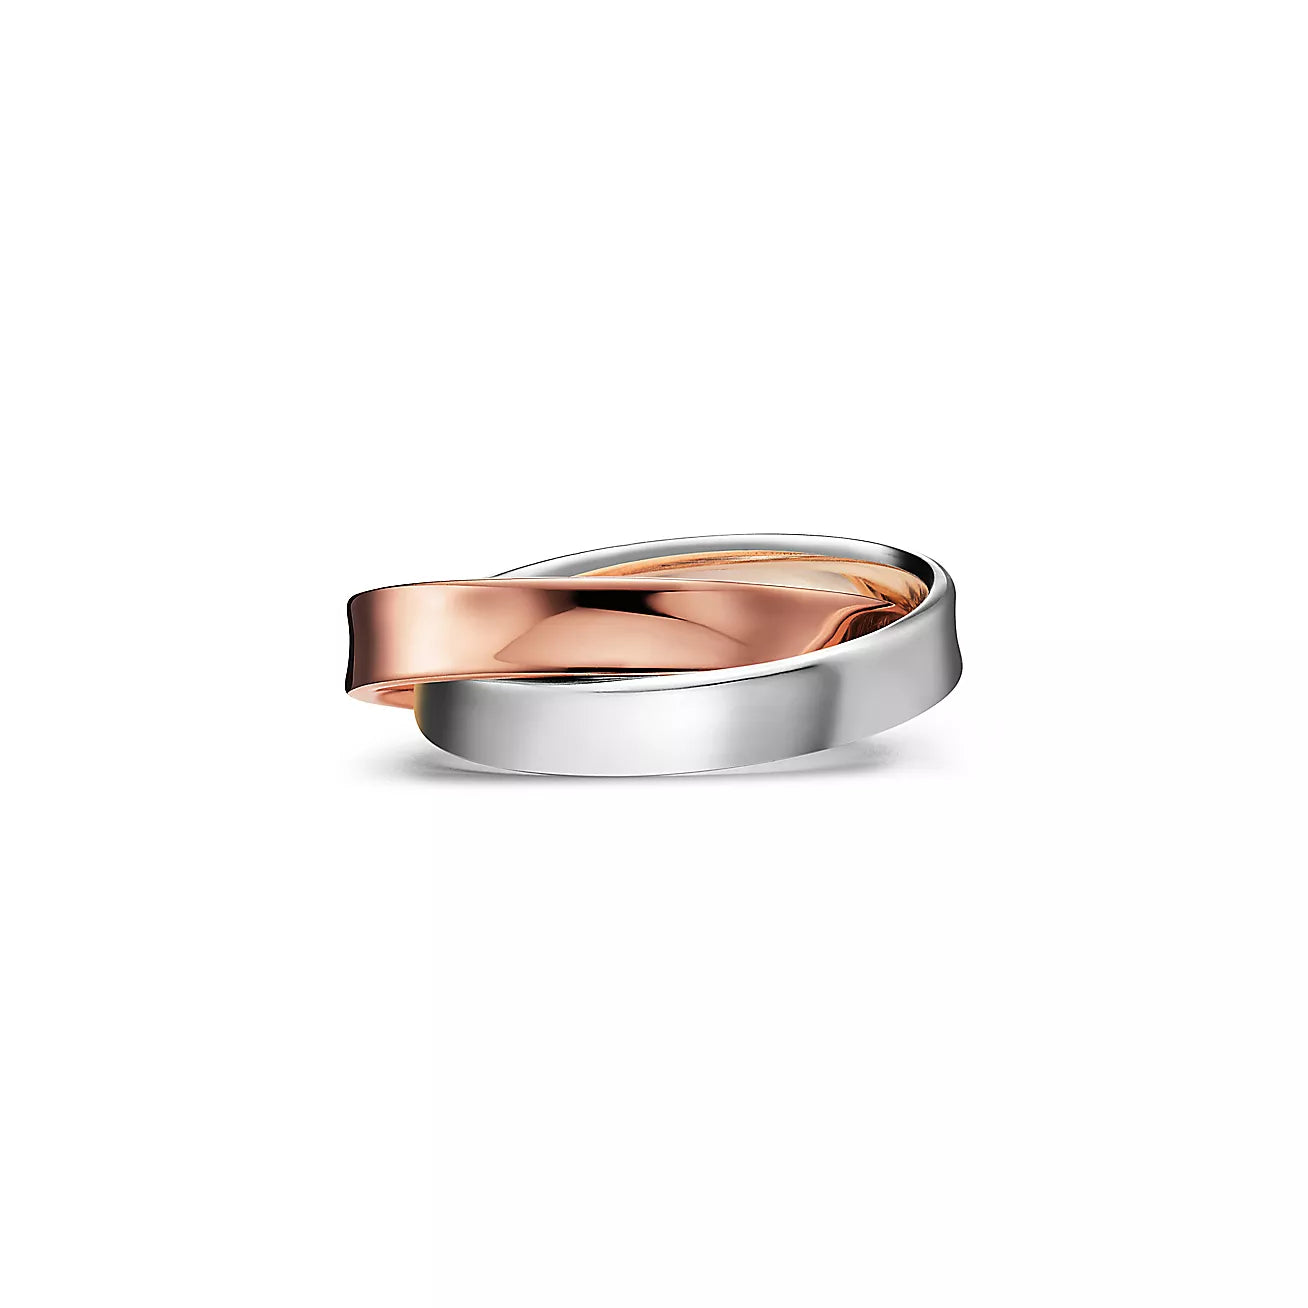 Tiffany 1837® Interlocking Circles Ring in Rose Gold and Sterling Silver